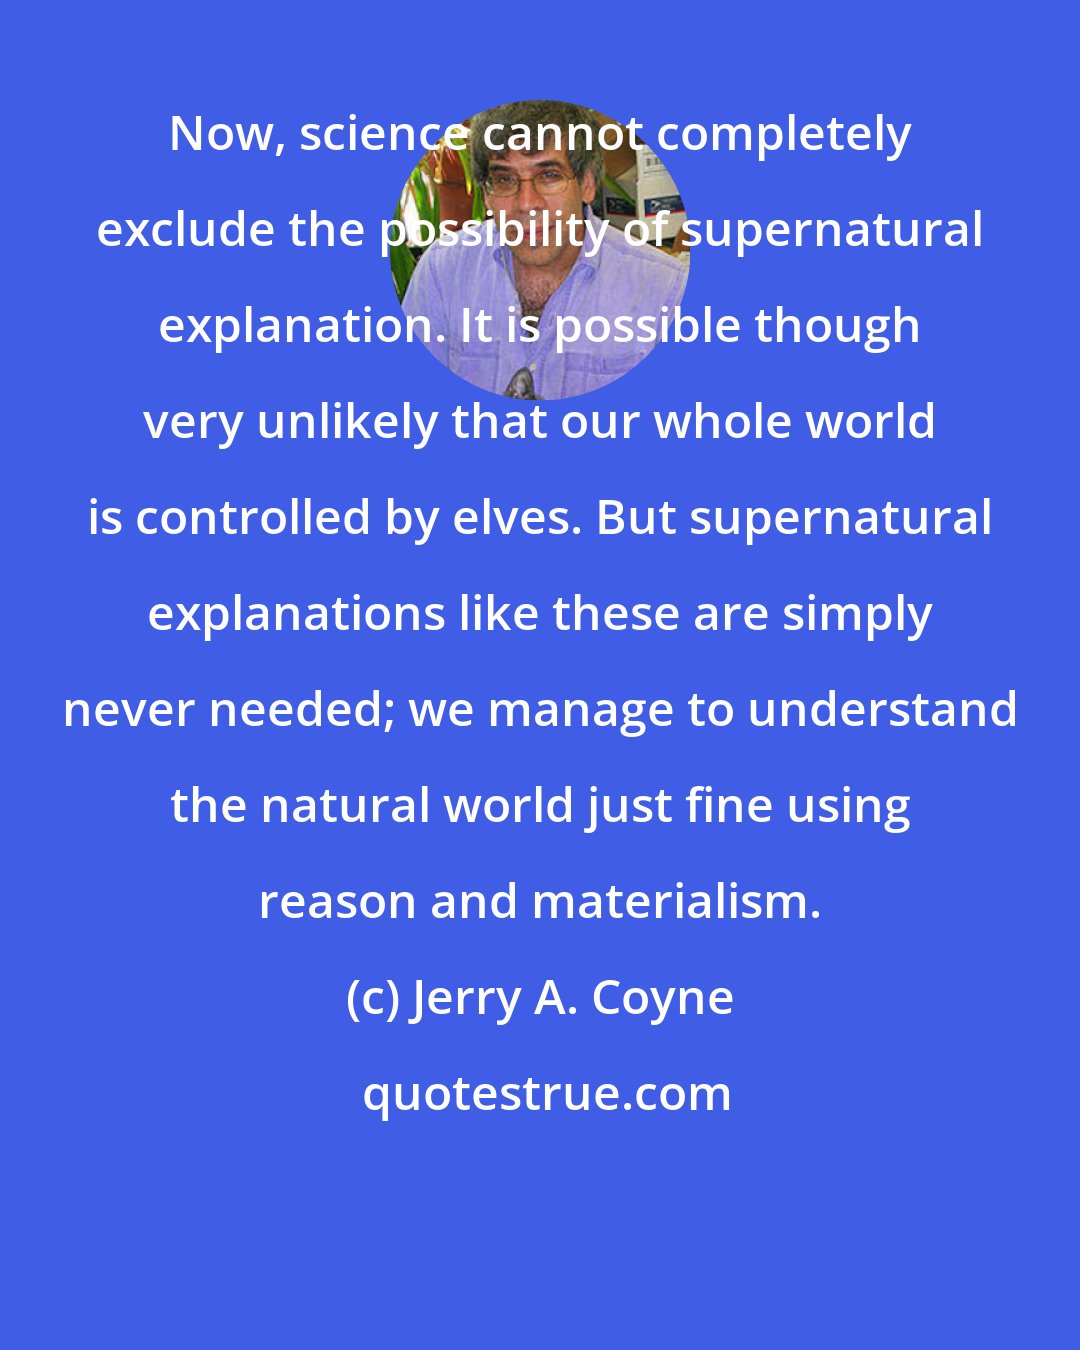 Jerry A. Coyne: Now, science cannot completely exclude the possibility of supernatural explanation. It is possible though very unlikely that our whole world is controlled by elves. But supernatural explanations like these are simply never needed; we manage to understand the natural world just fine using reason and materialism.